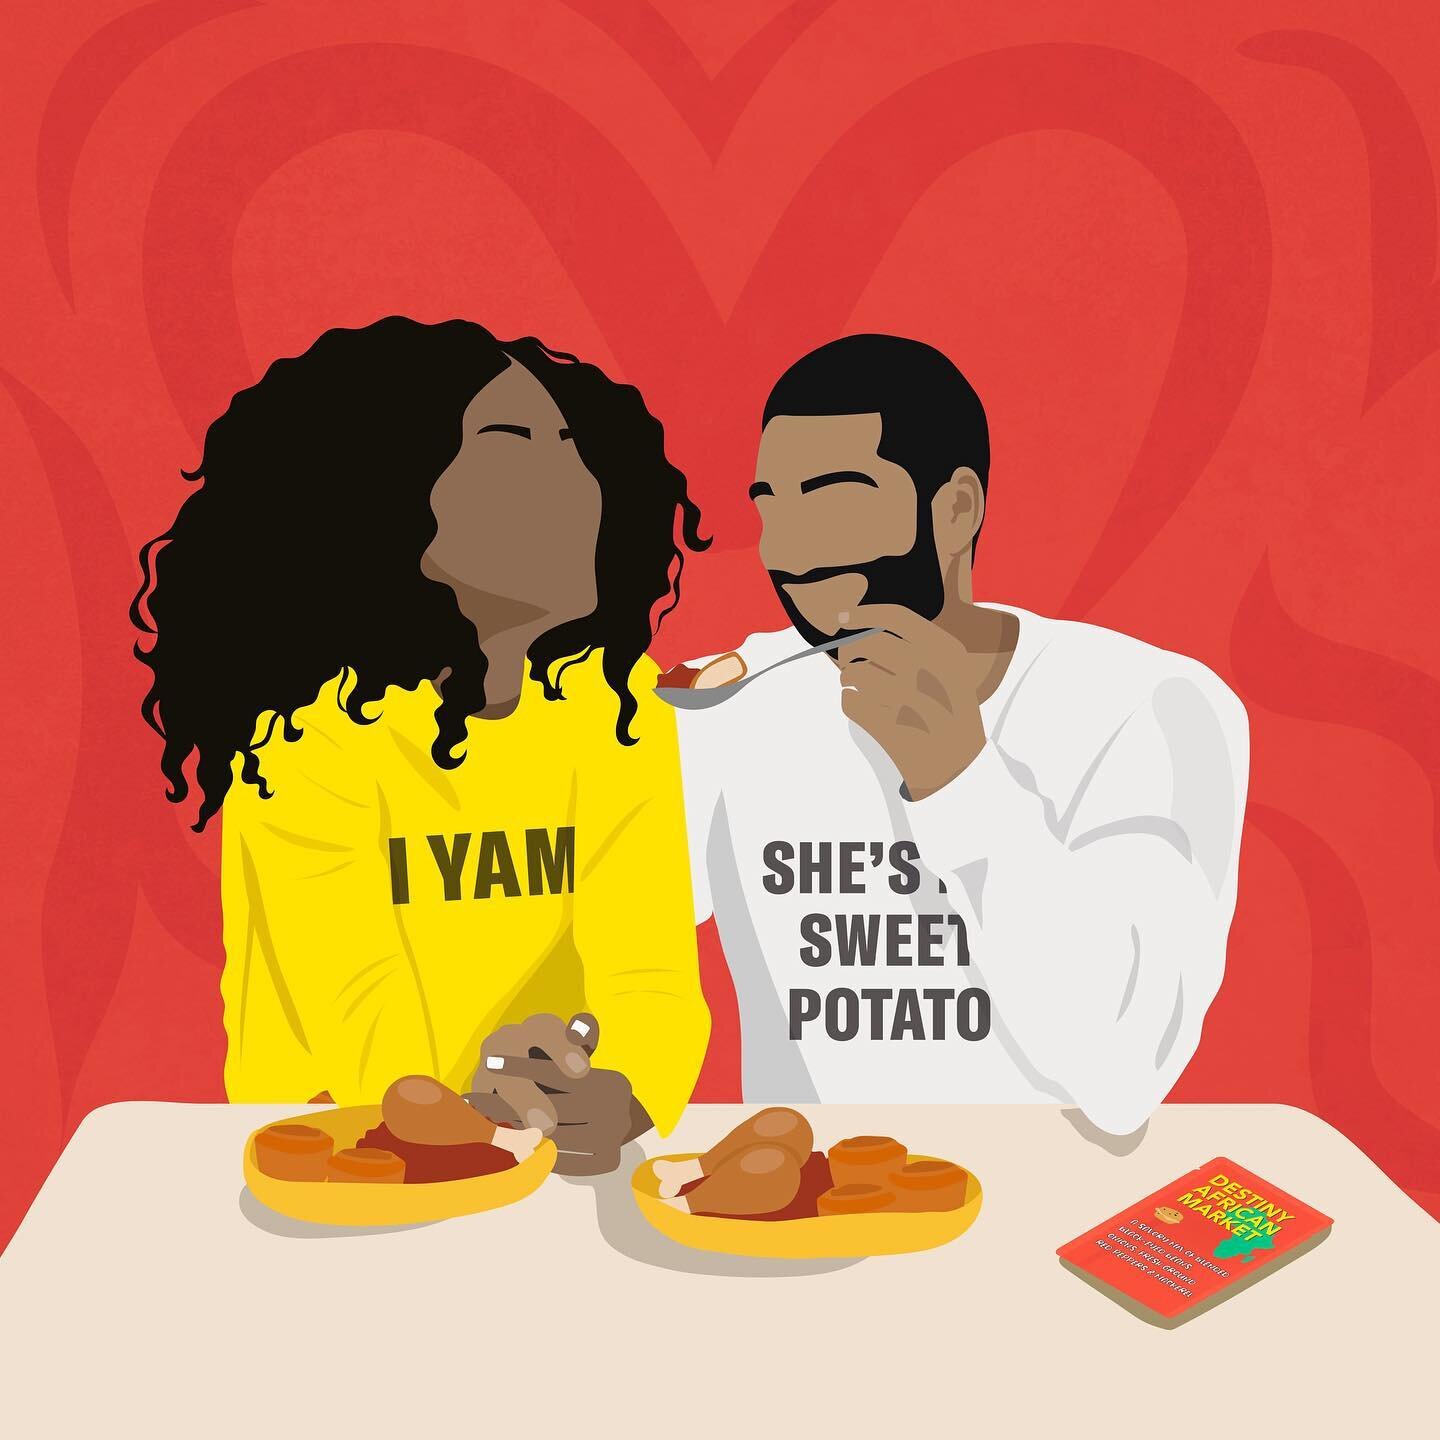 HIM: She&rsquo;s my sweet potato ❤️
HER: I Yam 💝
⠀
Did you know today is #BlackLoveDay? SWIPE LEFT to learn more 🙌🏾❤️

⠀
#PhotoDump #LoveDay #LoveSeason #ILoveAfricanFood #DAMGood #BlackLove #AfricanFood #BlackLivesMatter #BlackLoveMatters #MoinMo